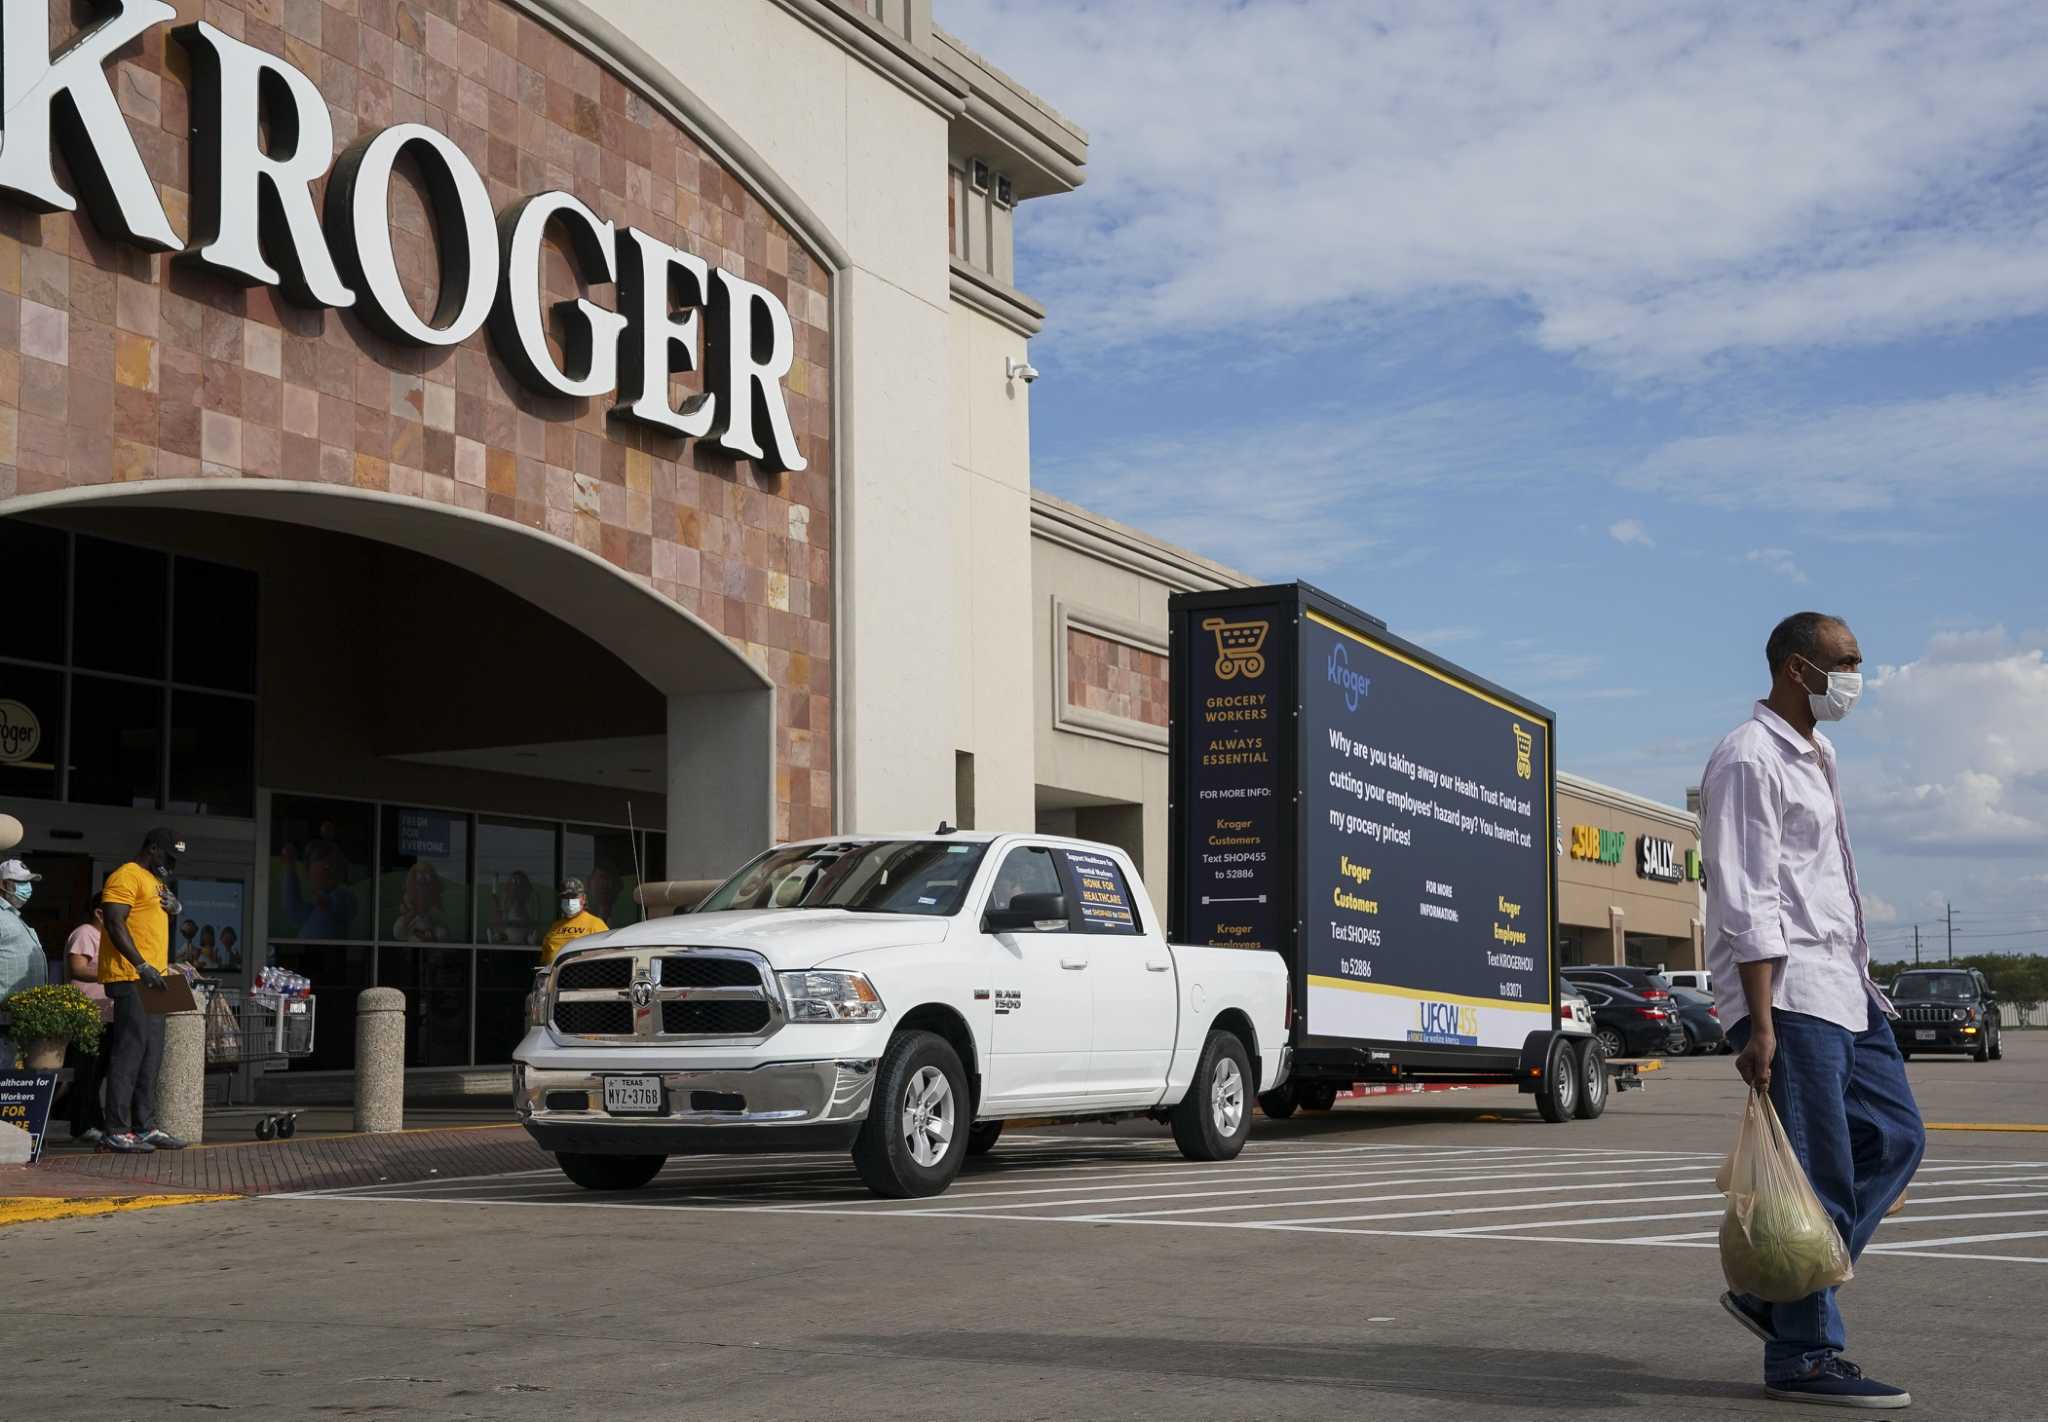 kroger jobs at shelby township location